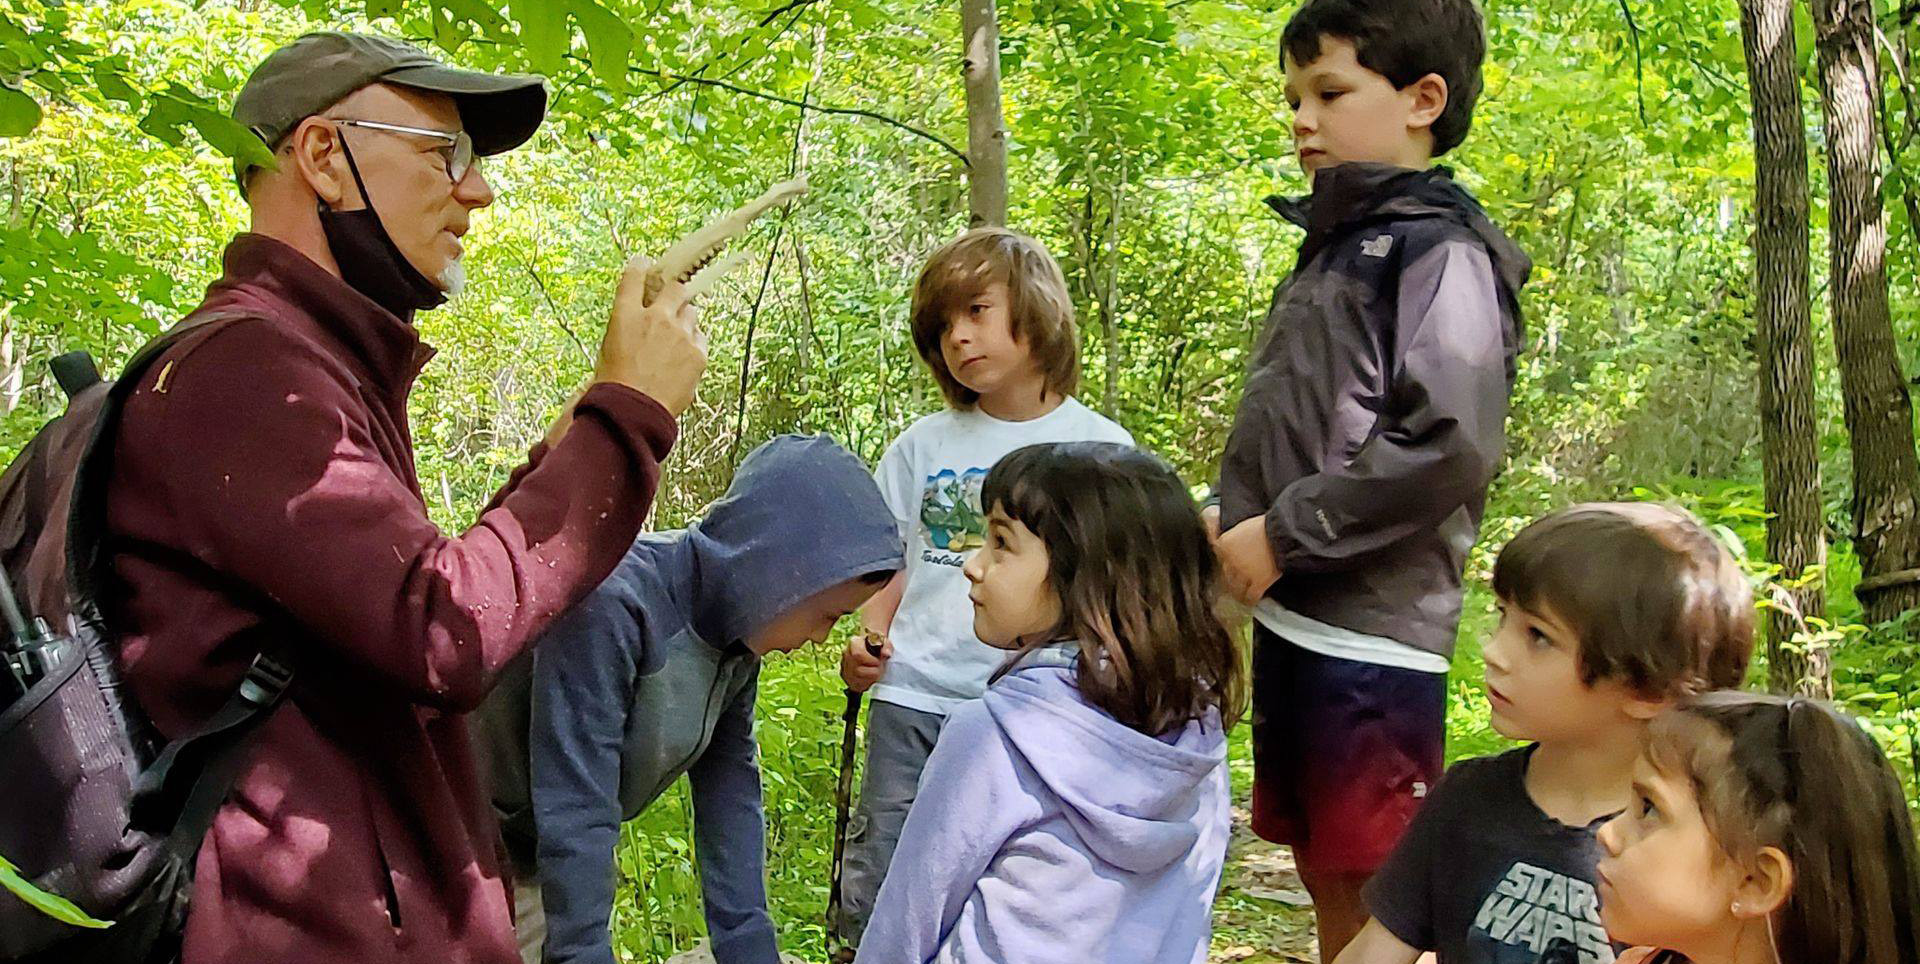 Instructor at homeschool program holding found jaw bone talking with students in forest